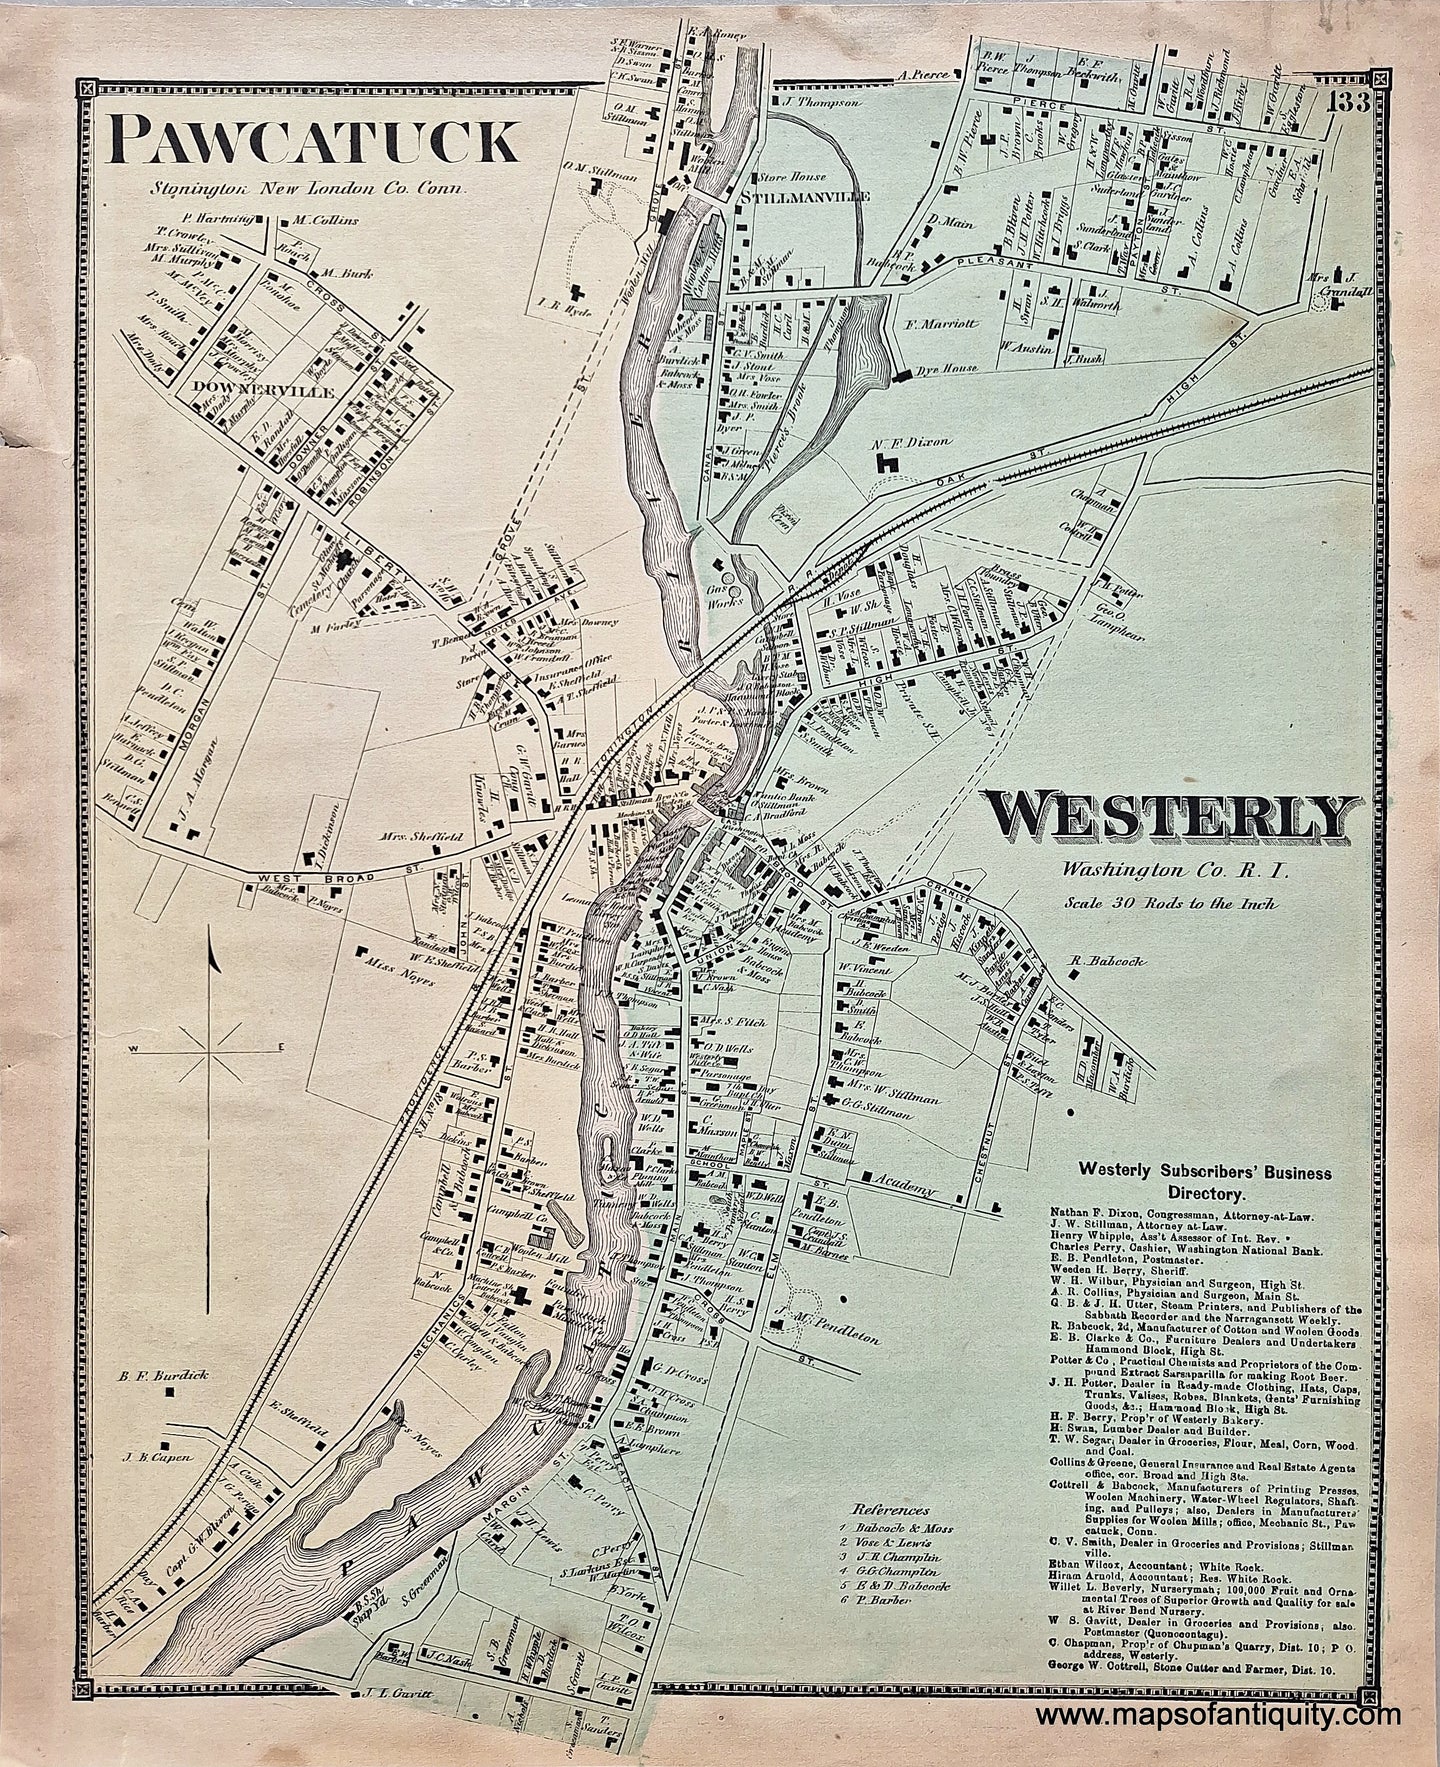 RHO085-Antique-Hand-Colored-Map-Pawcatuck-Westerly-Rhode-Island-RI-1870-Beers-Maps-Of-Antiquity